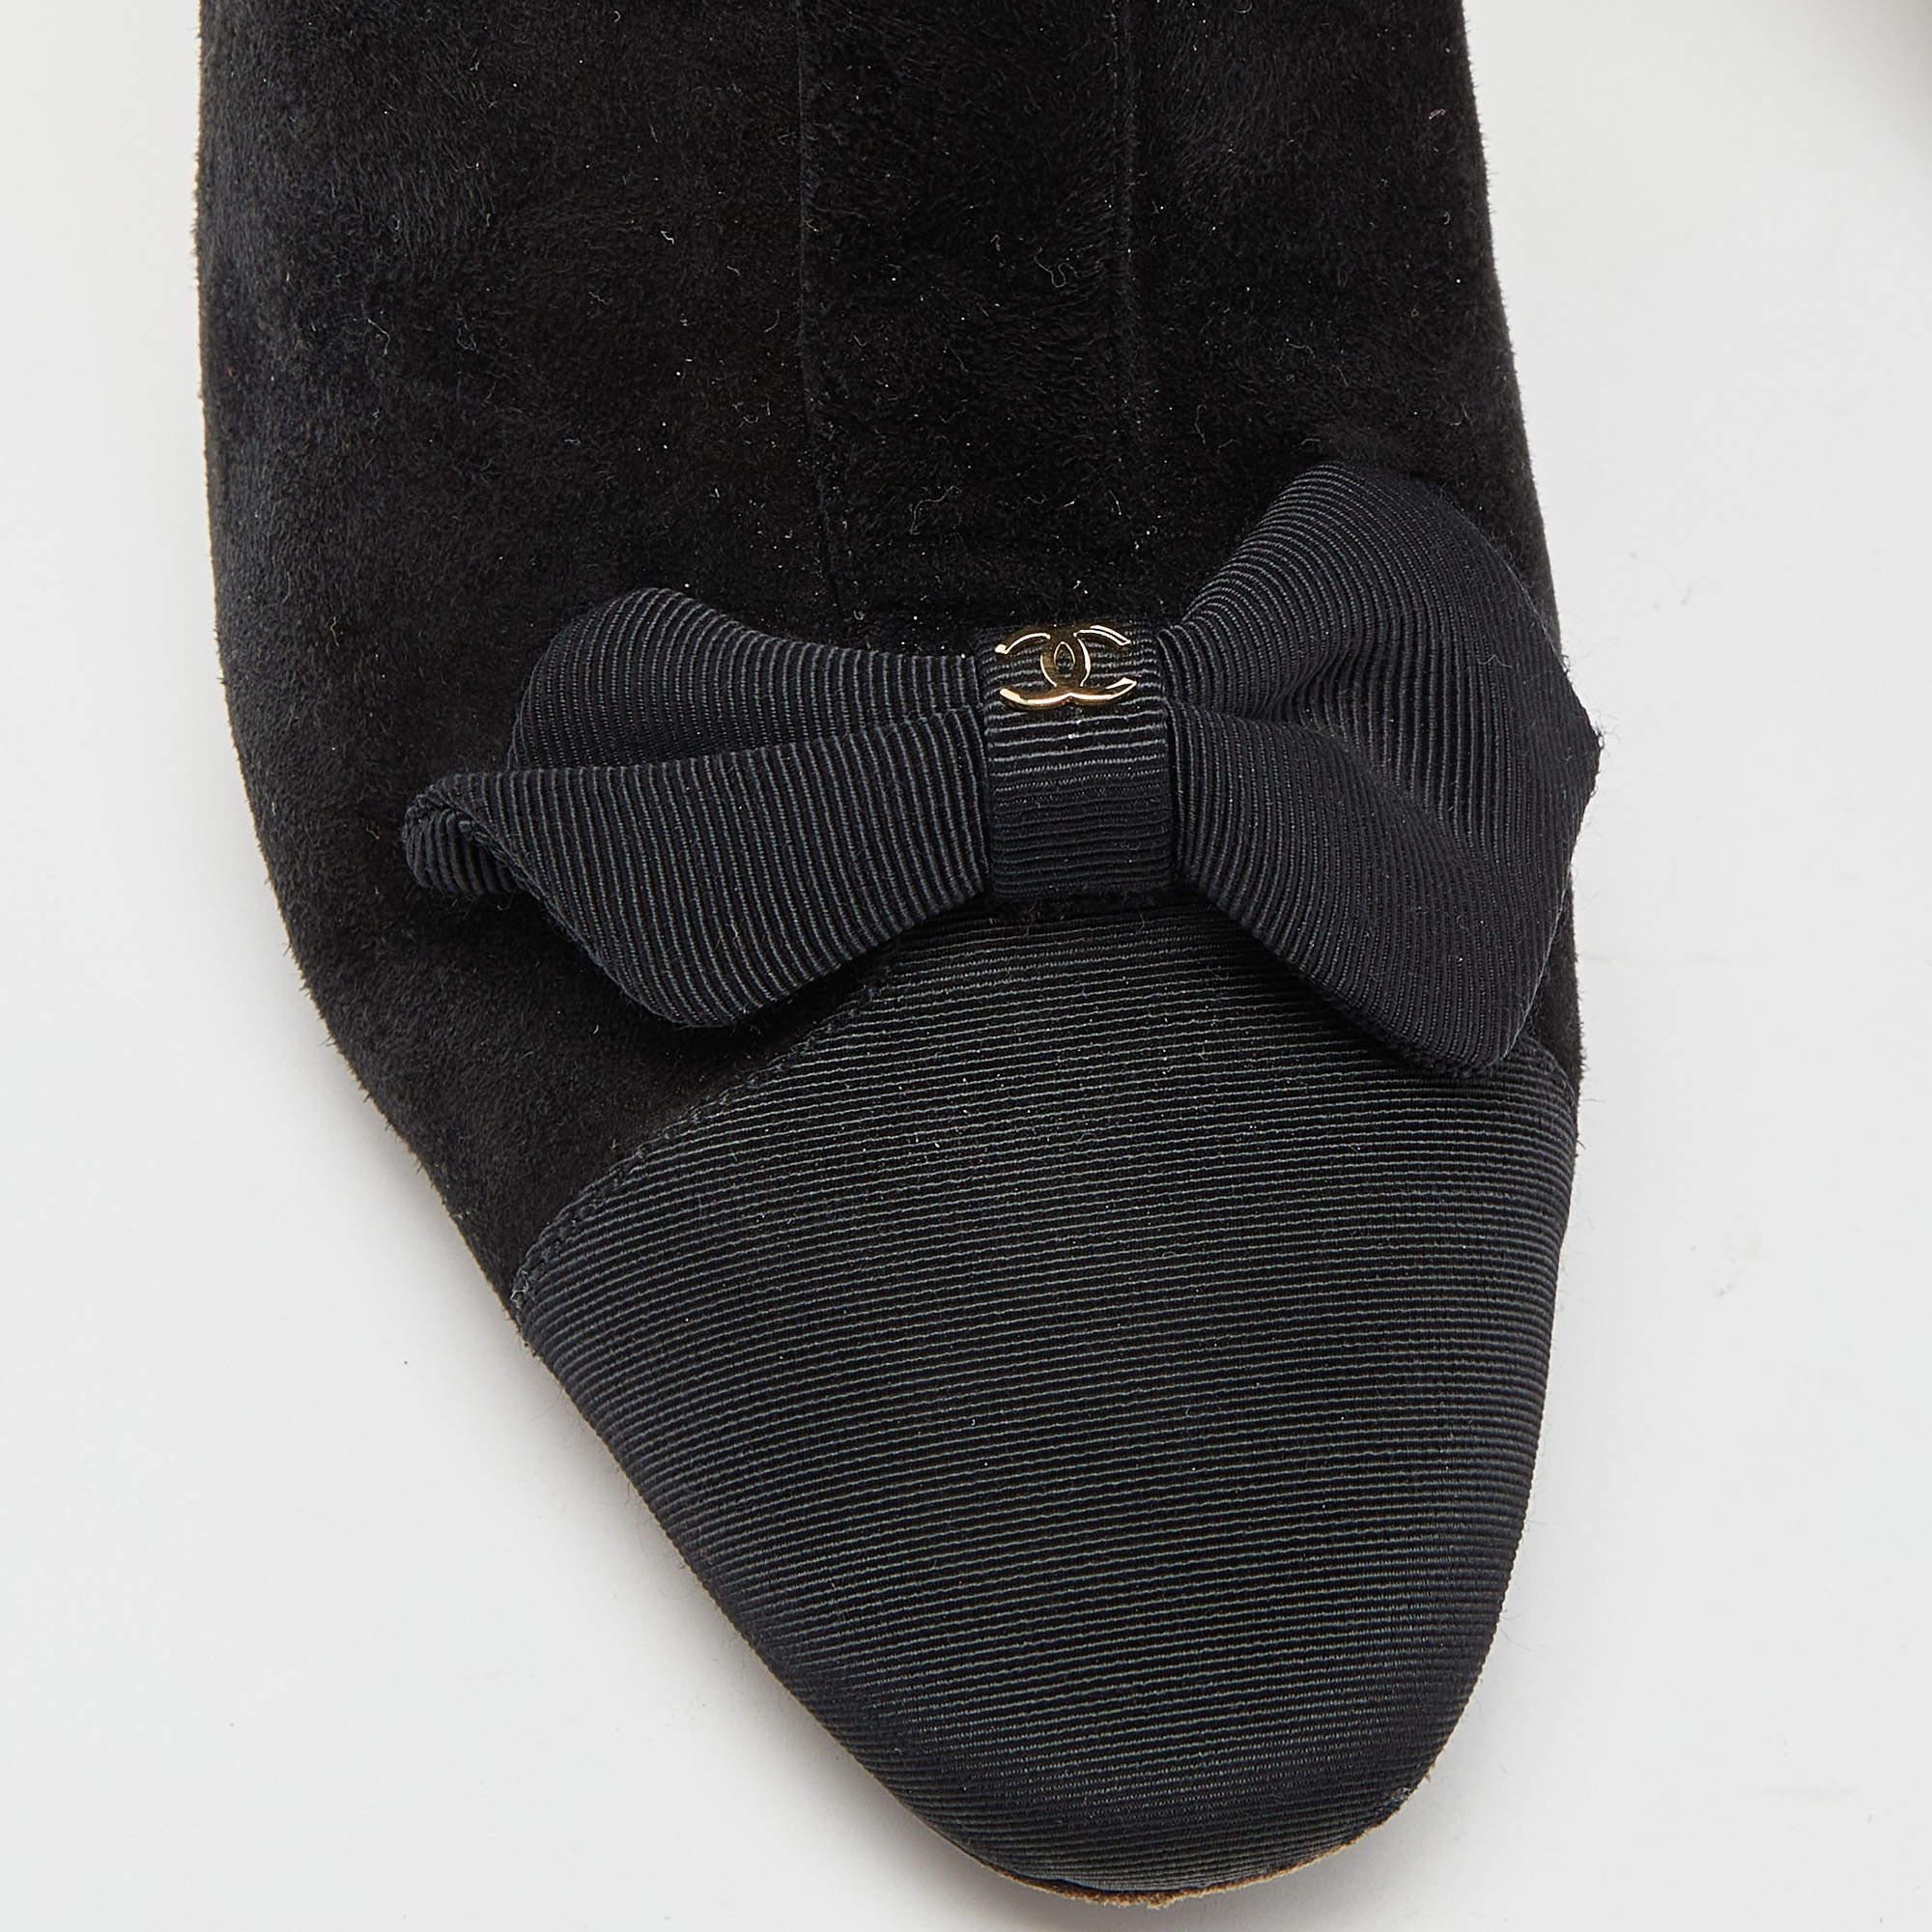 Chanel Black Suede and Canvas Zip Bow Cap Booties Size 39.5 2